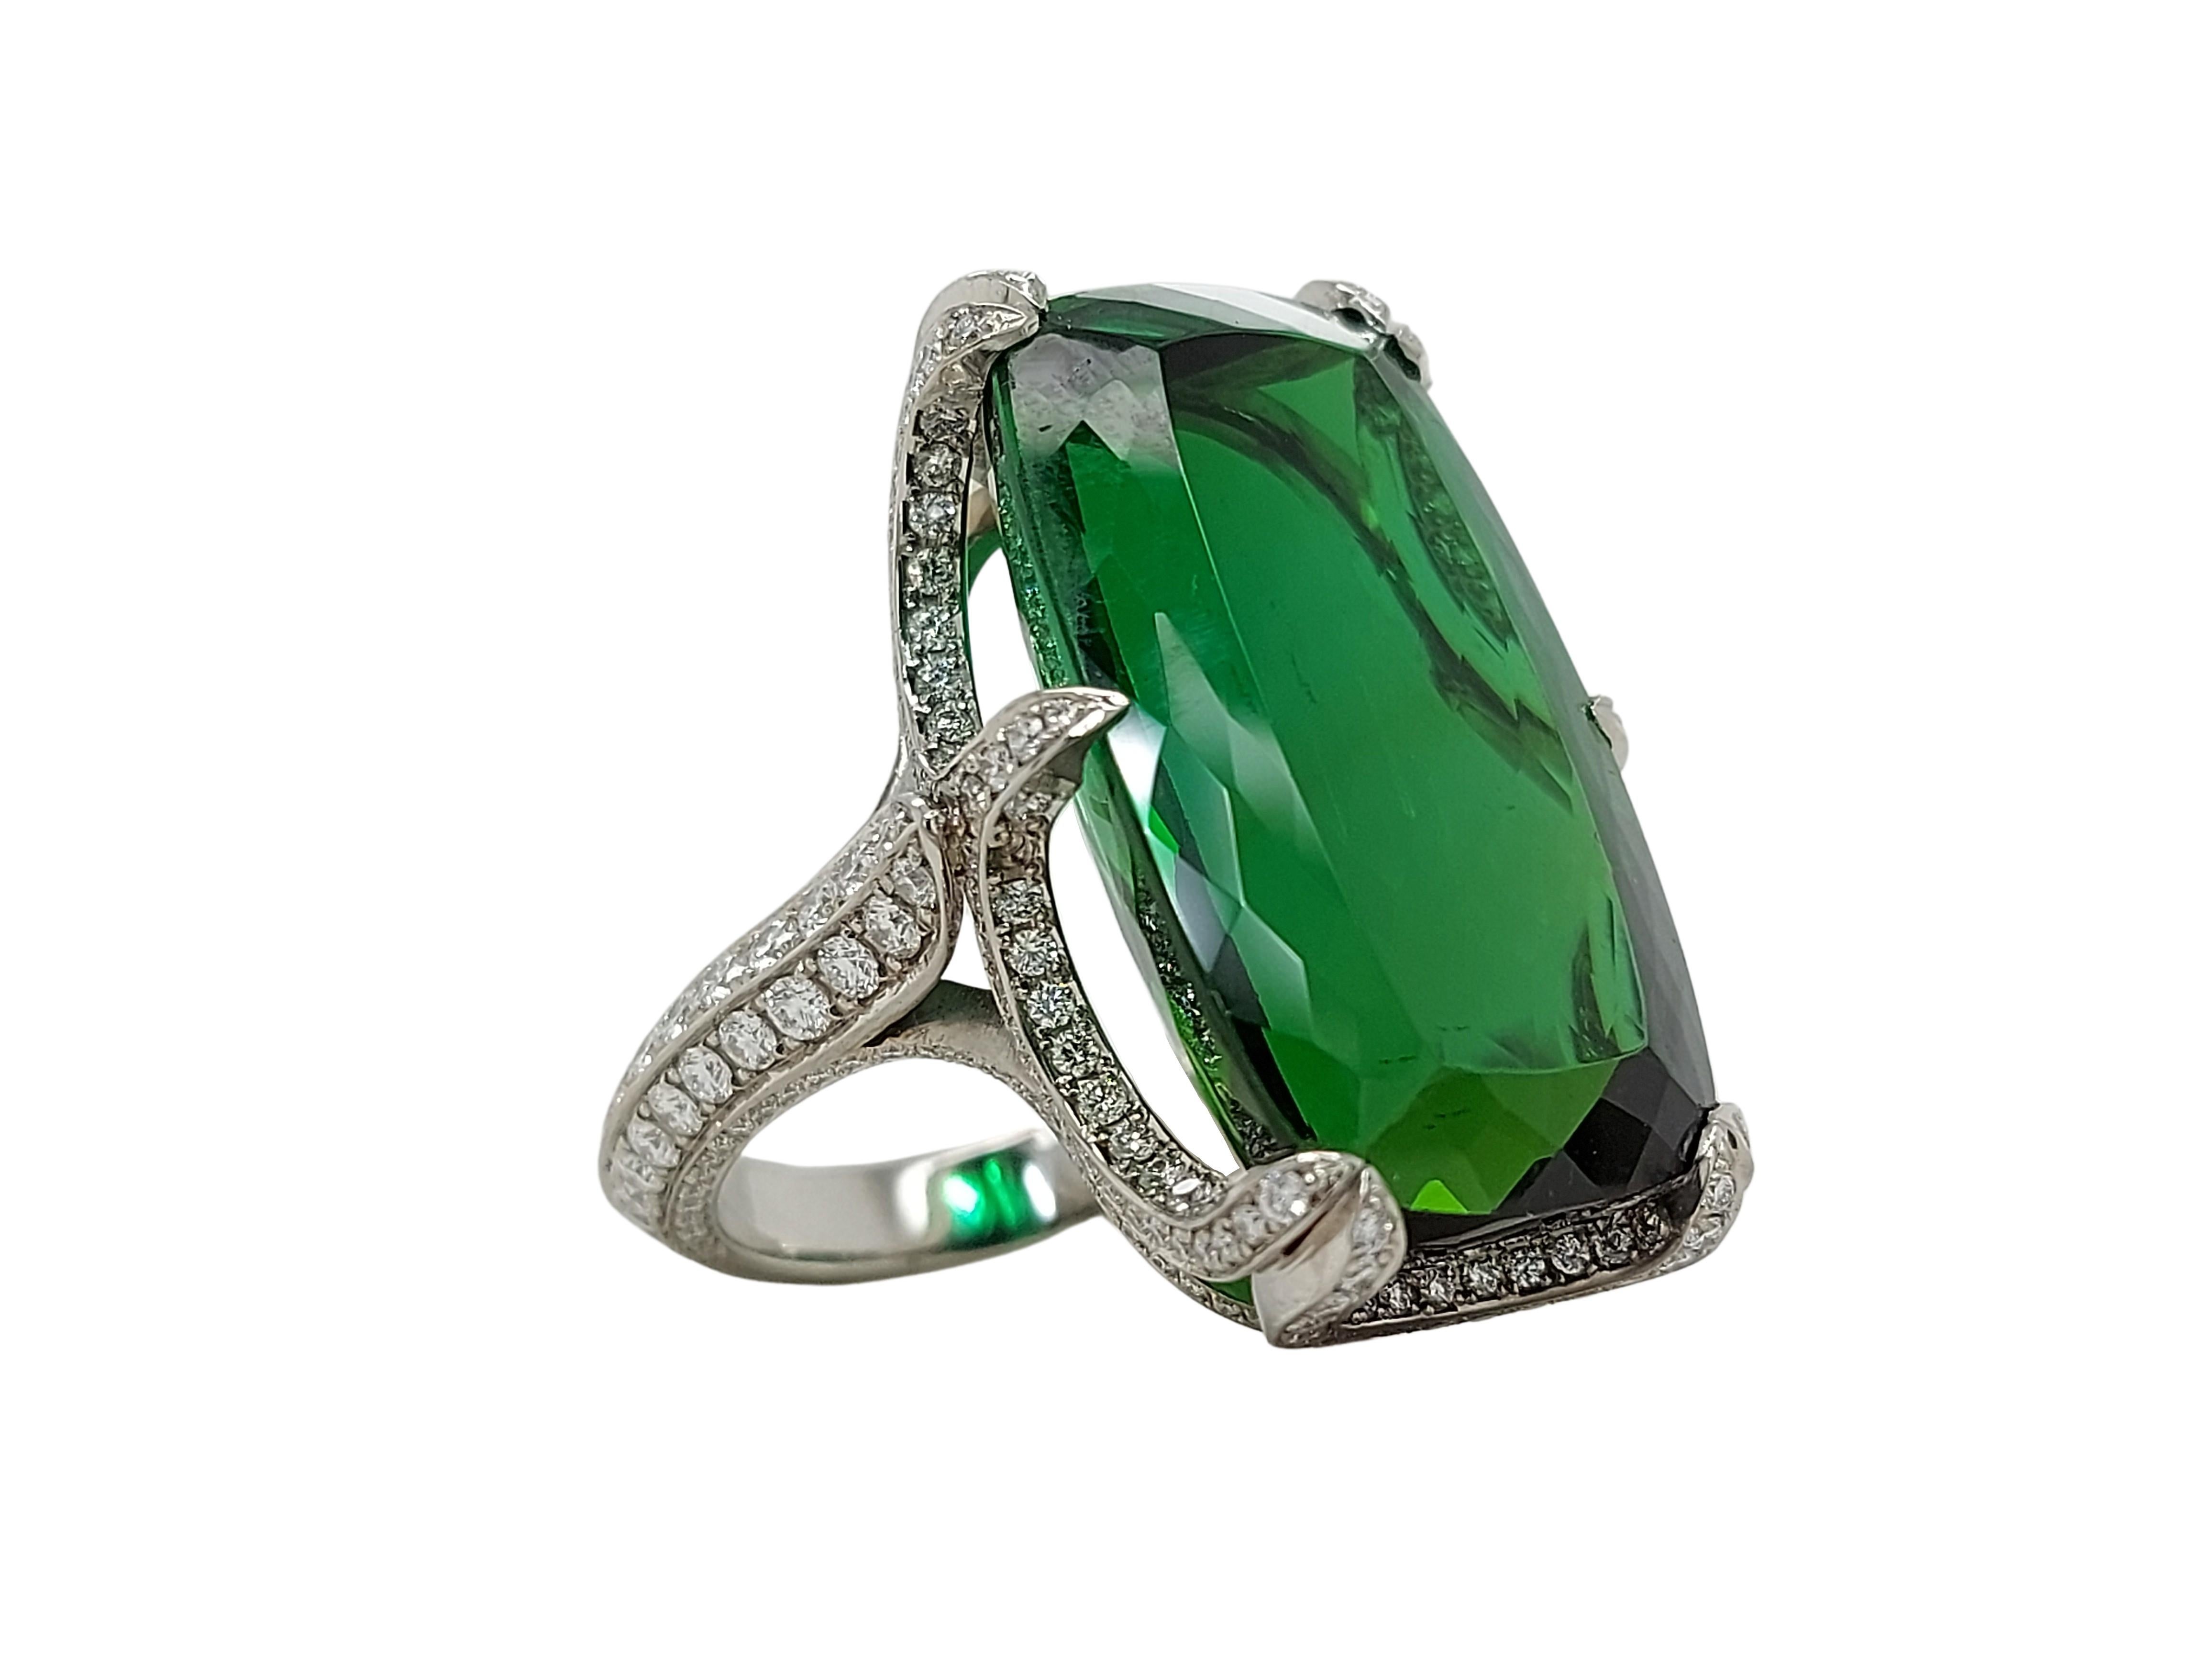  Exceptional Magnificent Solid Platinum Ring With 45.6 Carat Natural Tourmaline & Diamonds

This one of a kind unique handcrafted ring has been made in our atelier in Antwerp Diamond City.

Tourmaline: 45.6 ct Vivid Green

Diamonds: Brilliant cut